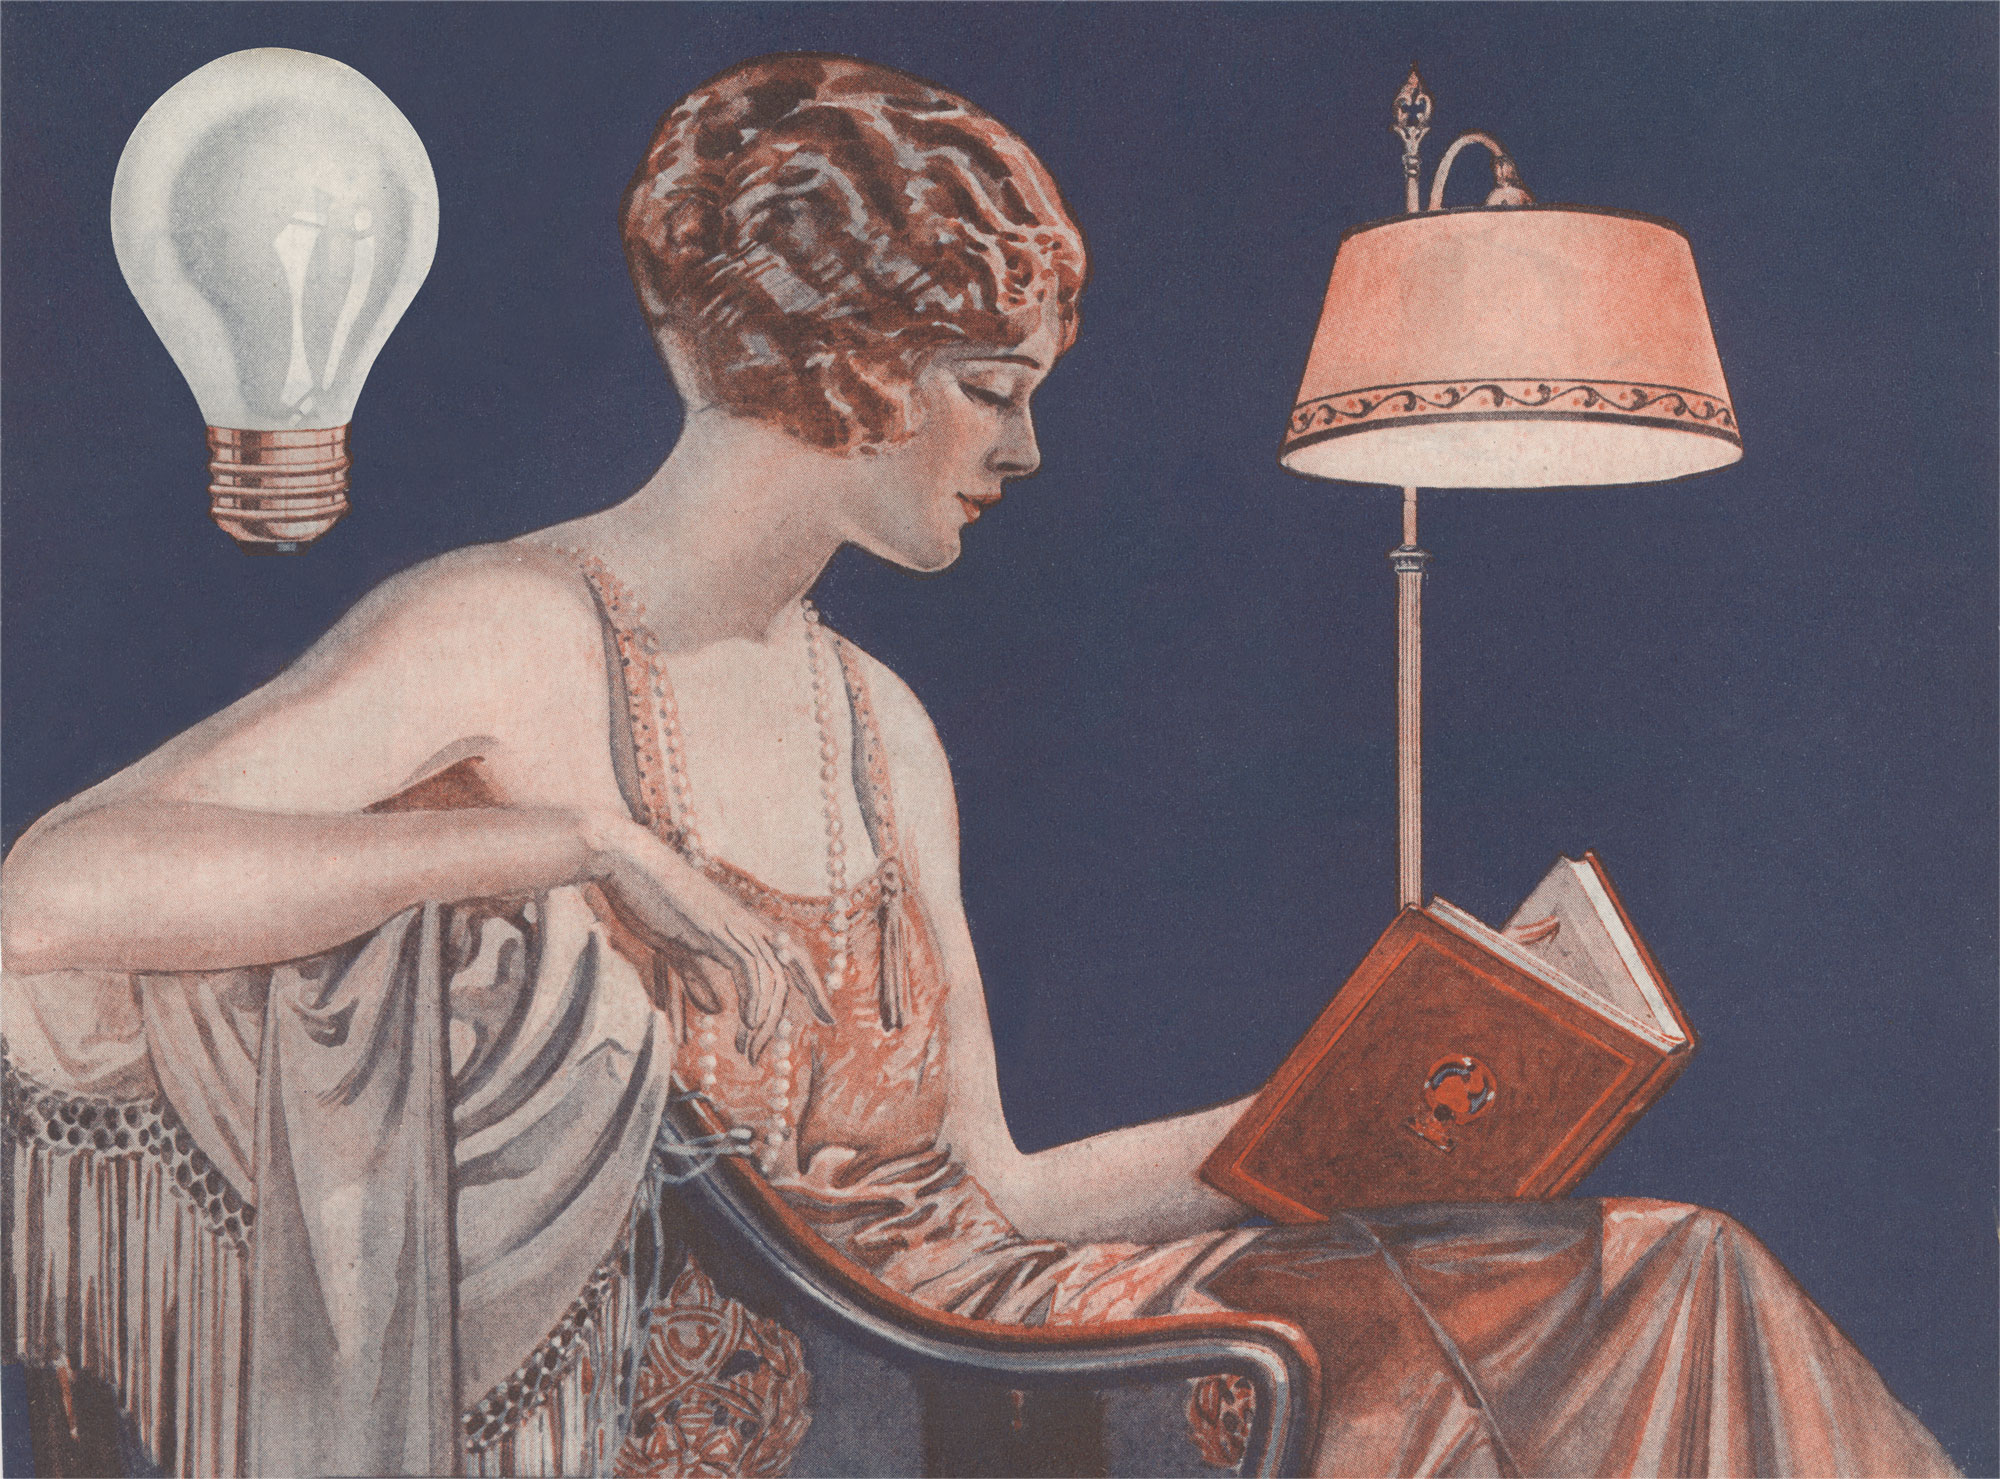 vintage advertisement of woman reading